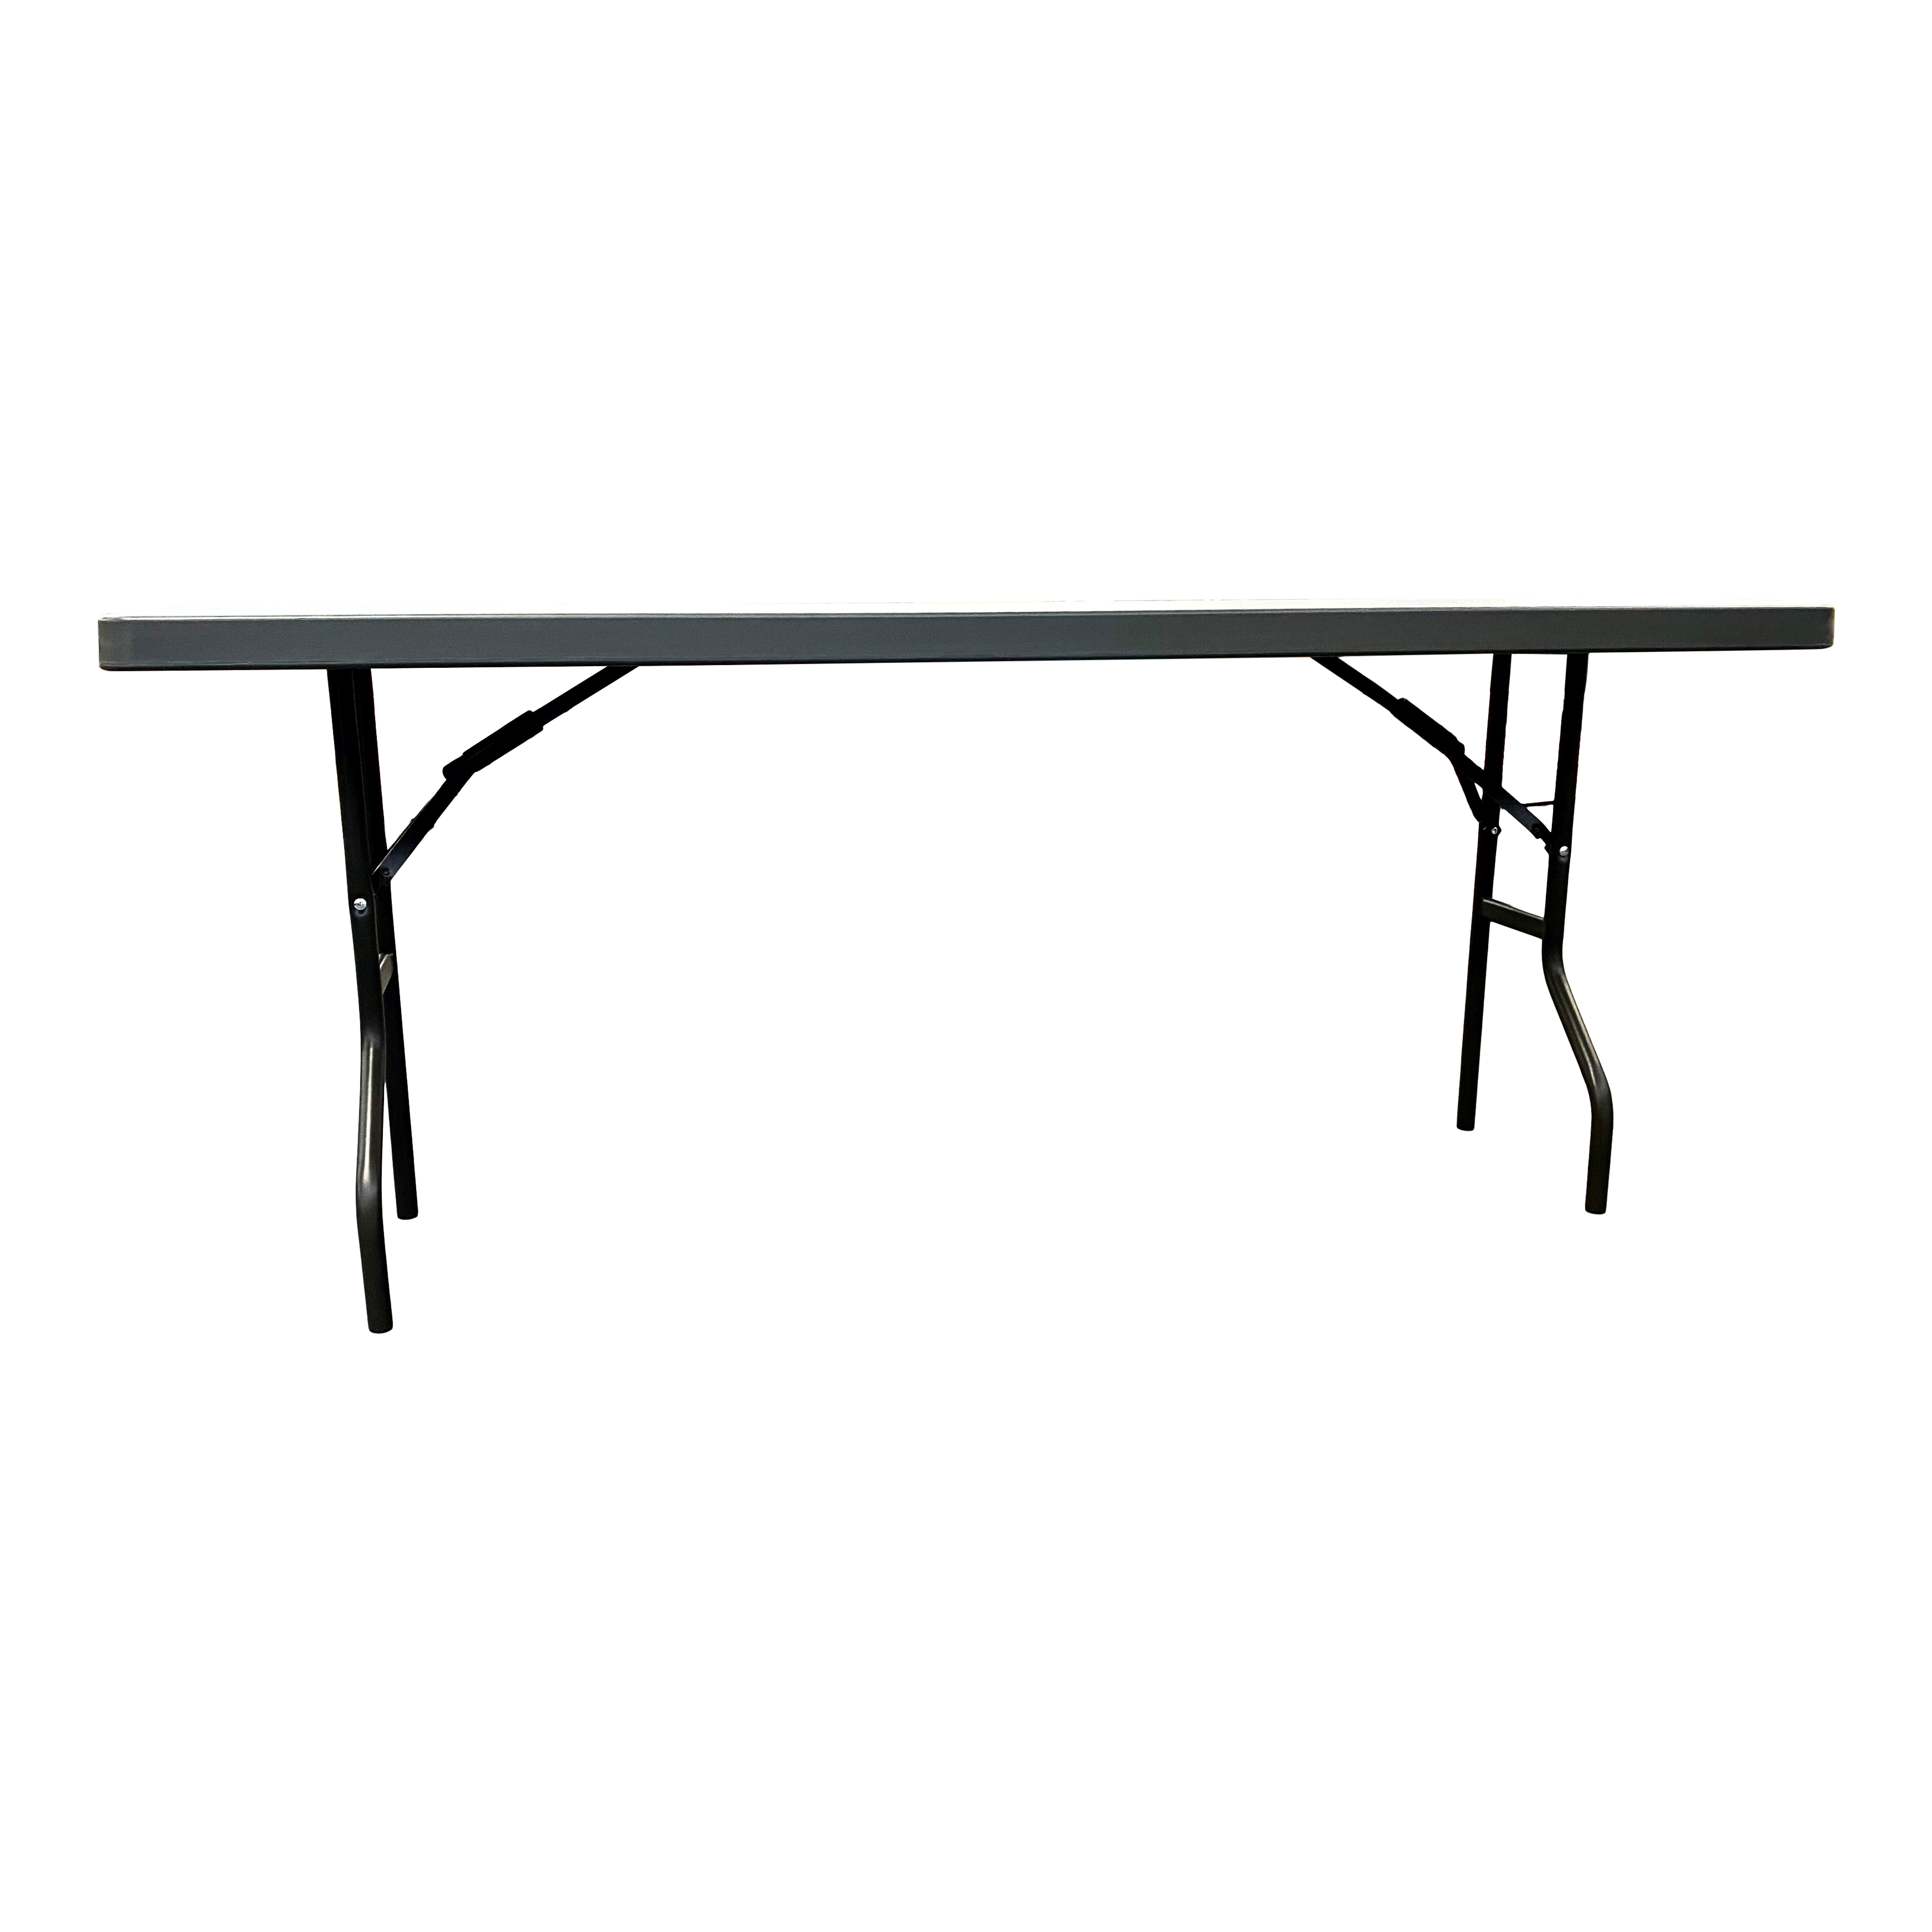 A charcoal six-foot utility folding table.